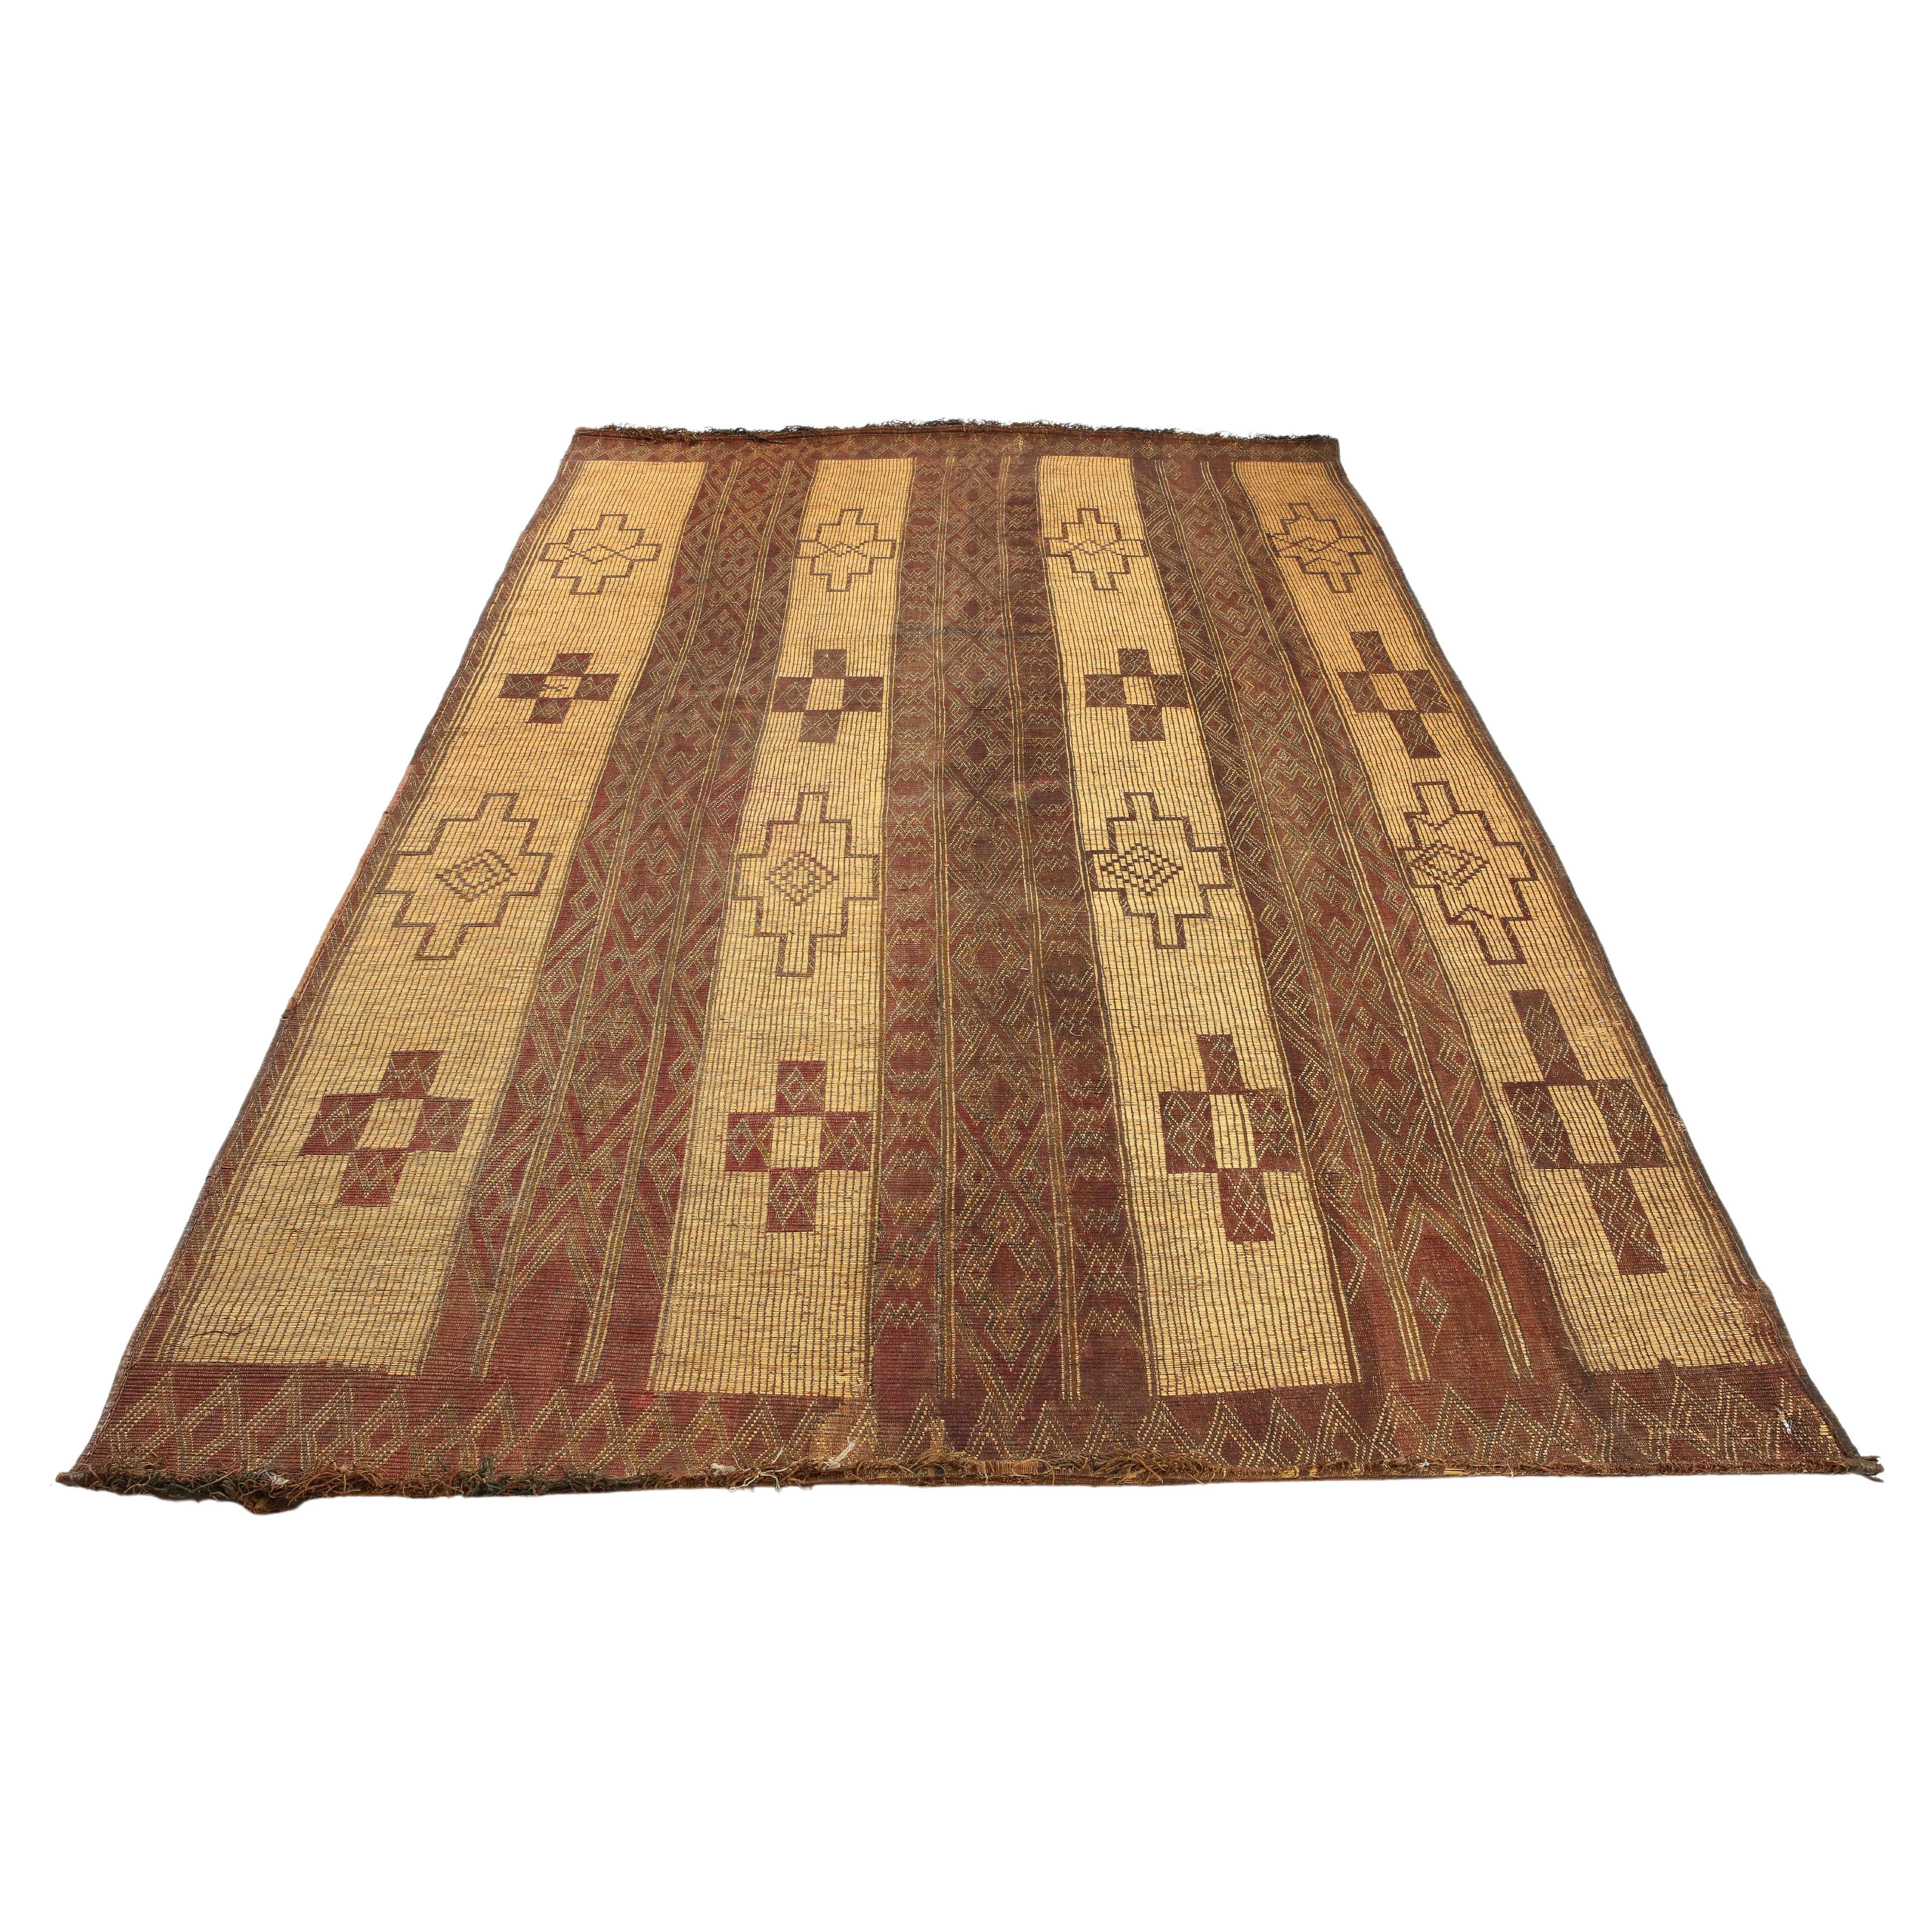 19th /early 20th C. Tuareg Leather & Reed Hand-Woven Carpet, Sahara Desert For Sale